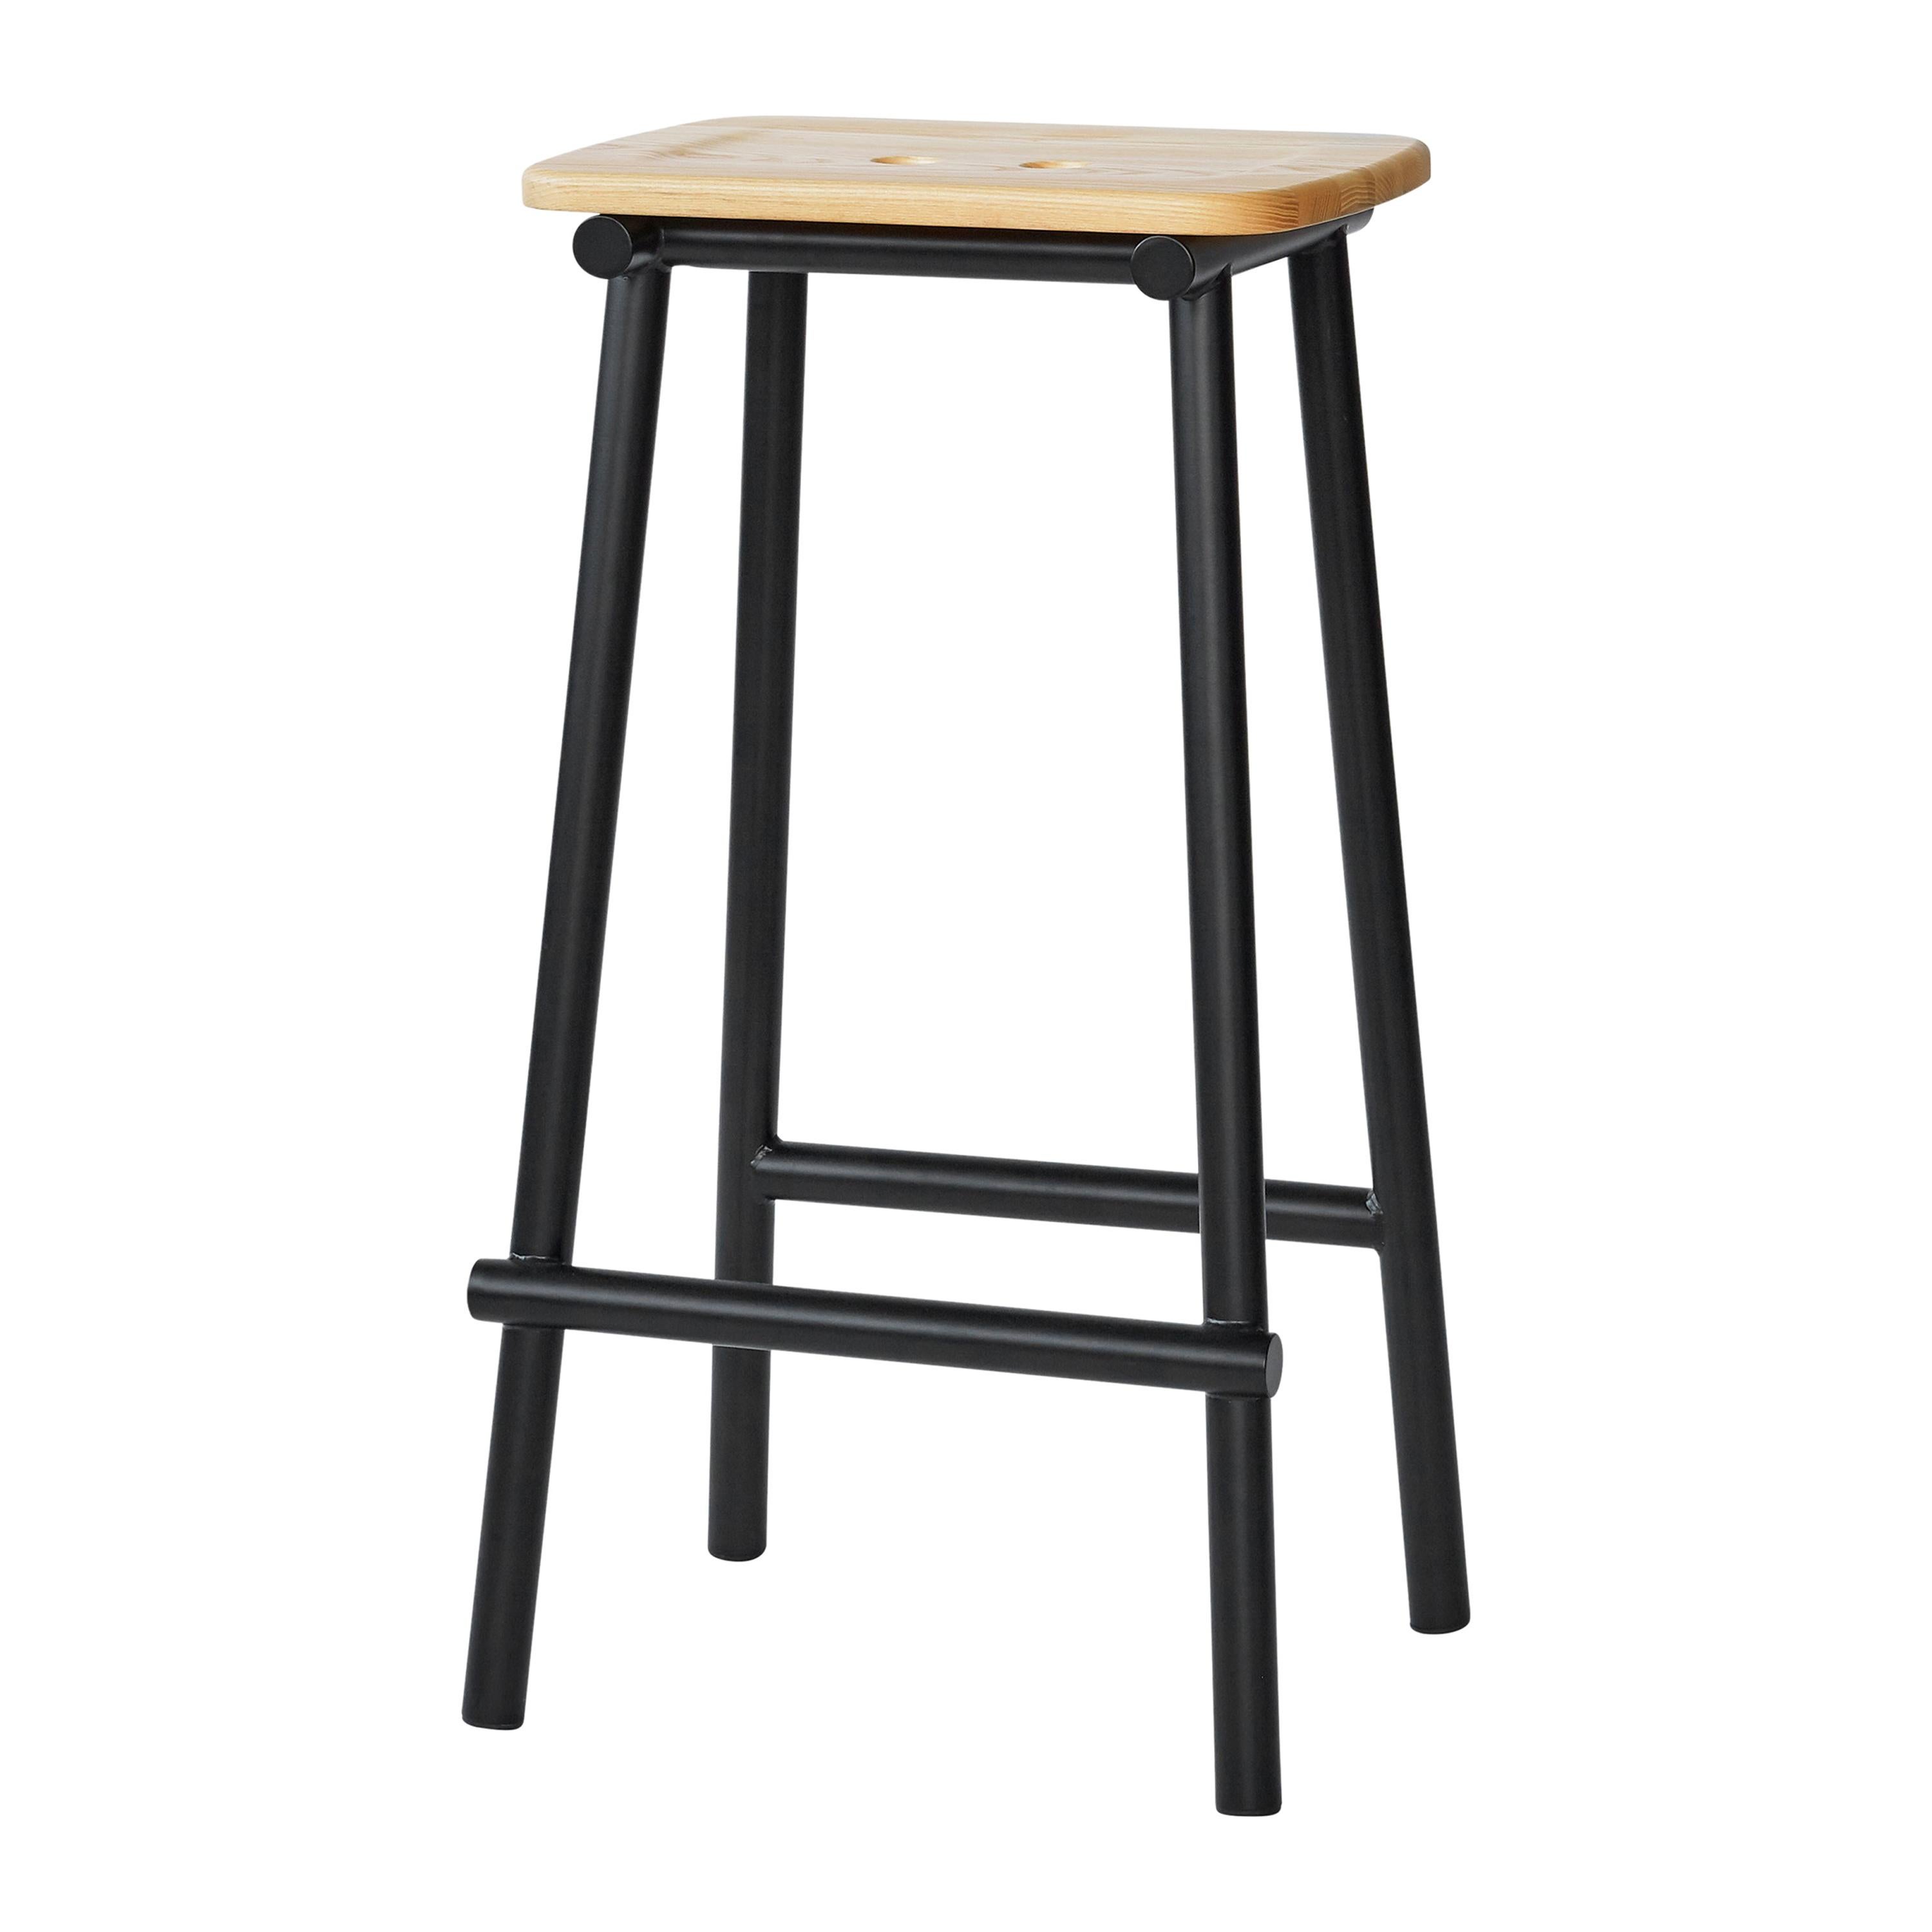 Tubby Tube Bar Stool with Wooden Seat by Faye Toogood